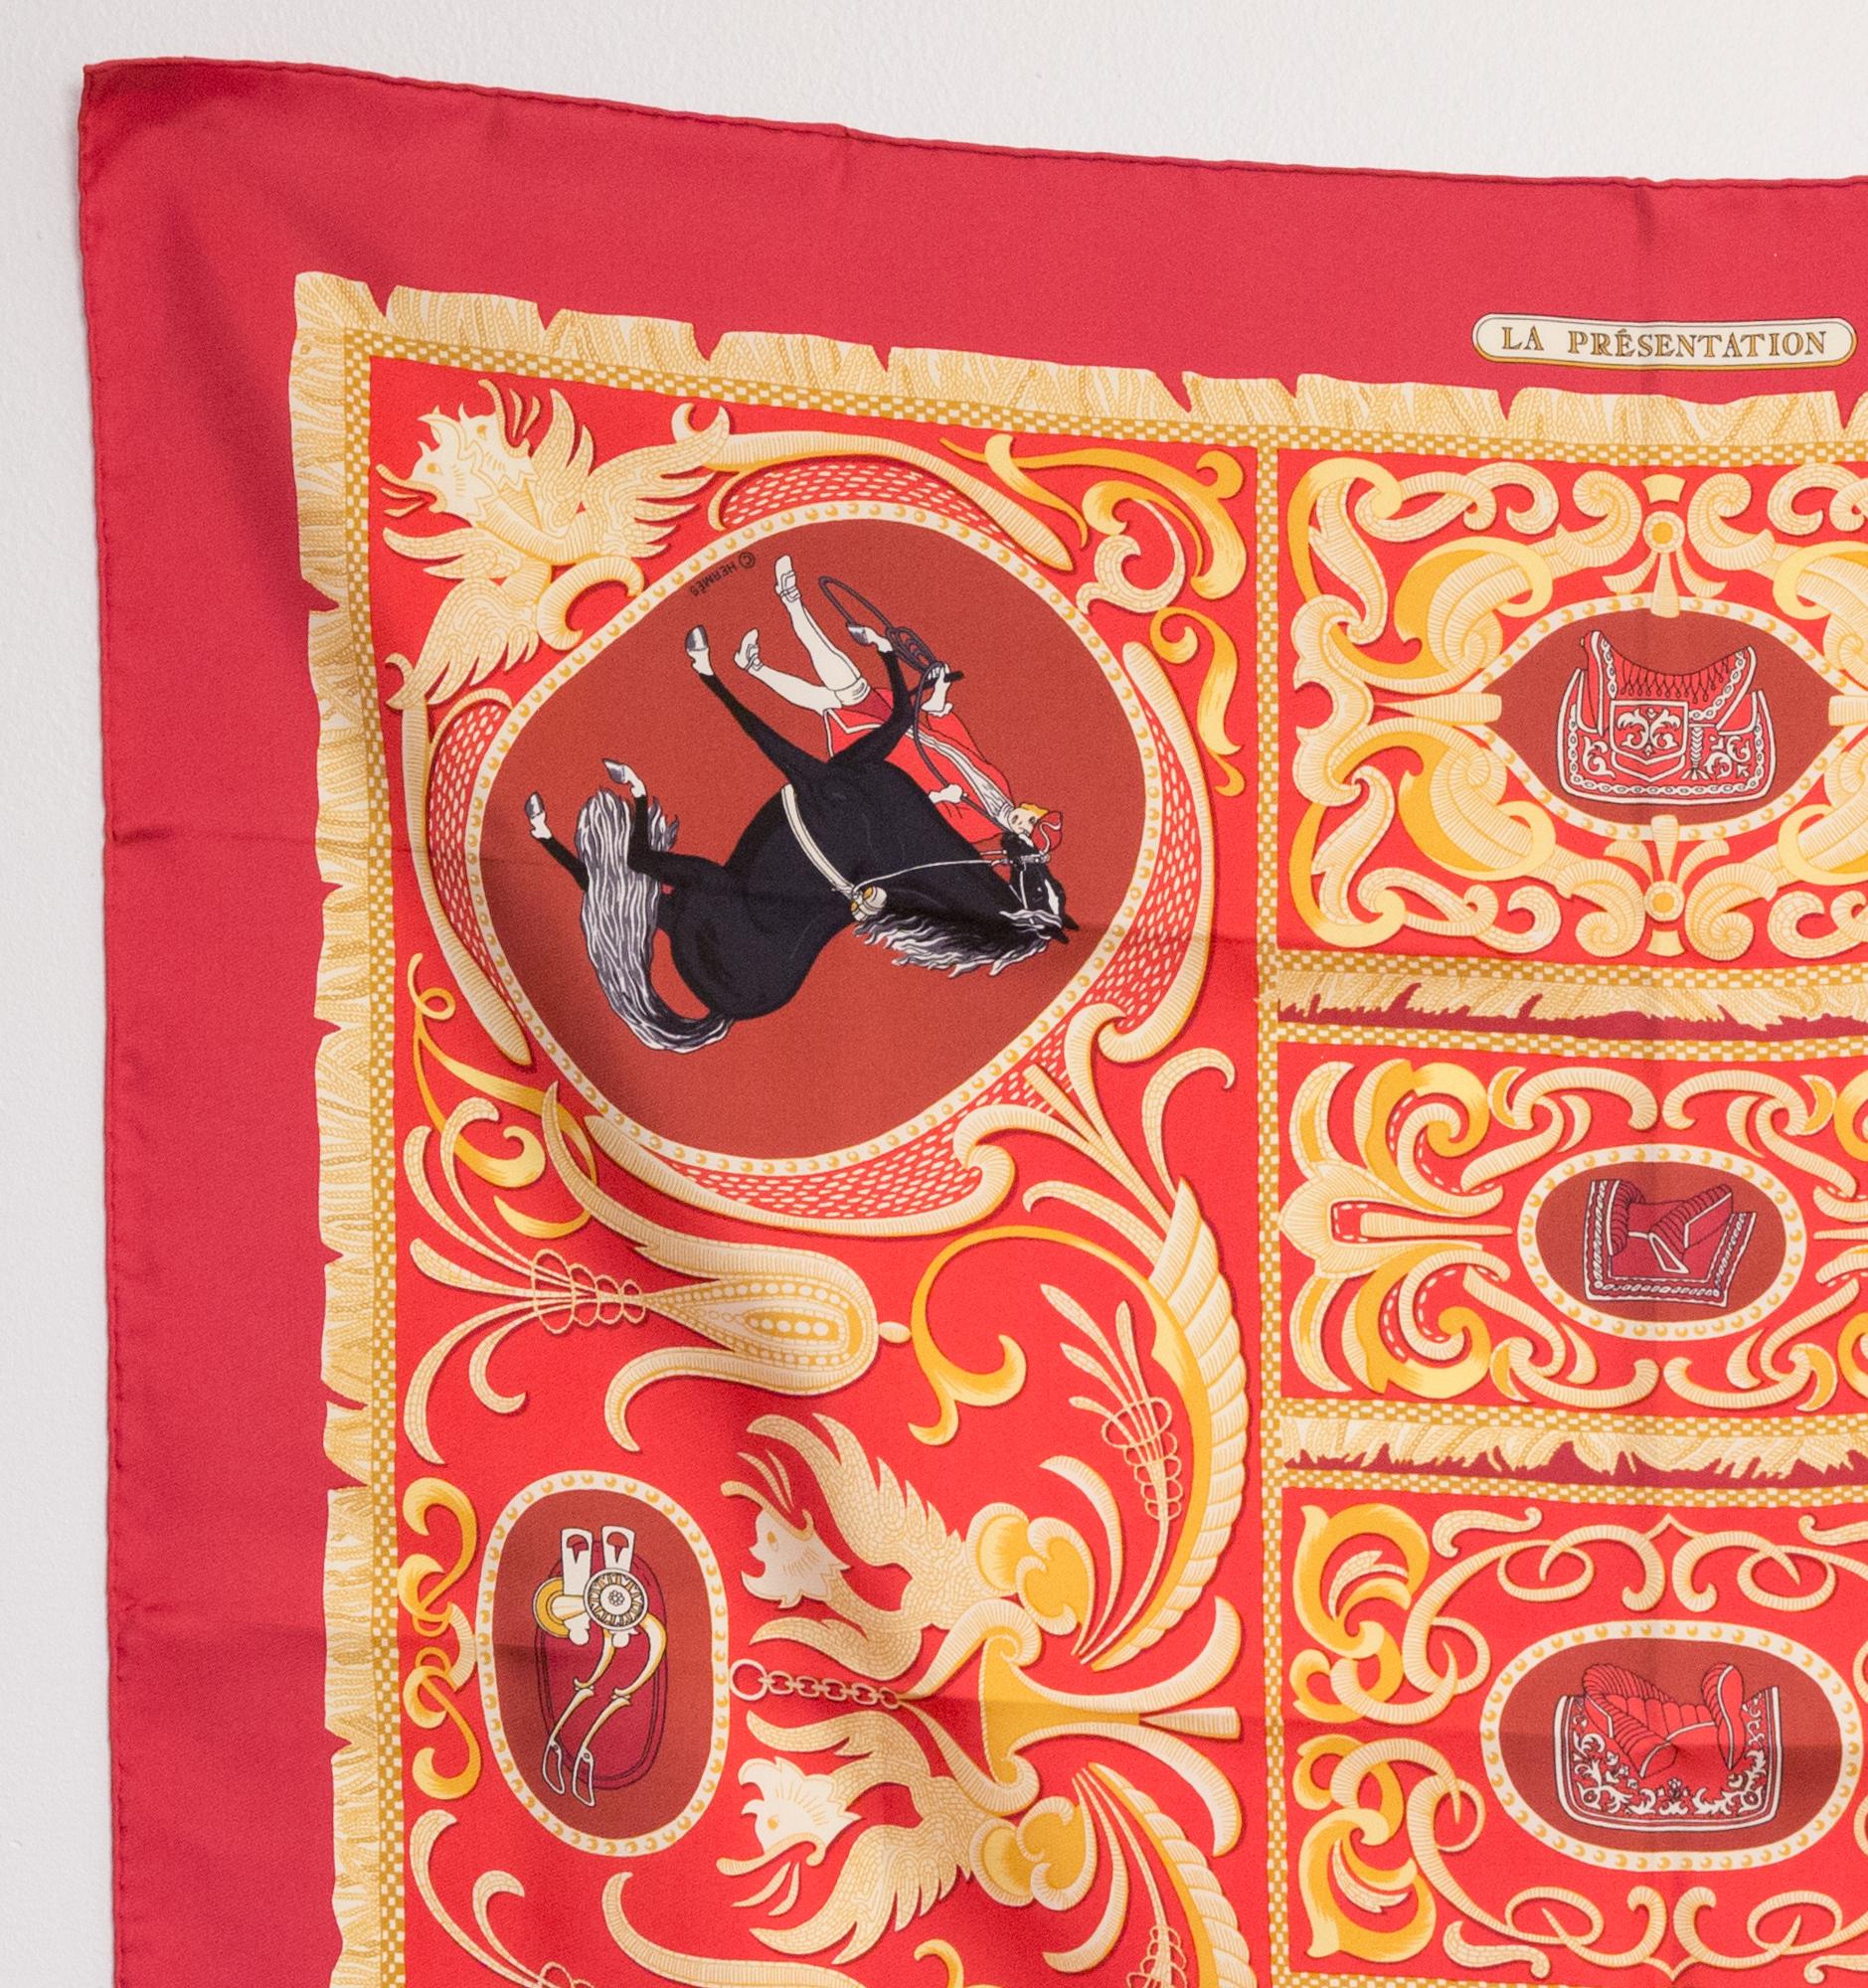 Hermes silk scarf La Presentation by Christiane Vauzelles featuring a red border.
Circa 1978
In good vintage condition. Made in France.
35,4in. (90cm)  X 35,4in. (90cm)
We guarantee you will receive this  iconic item as described and showed on